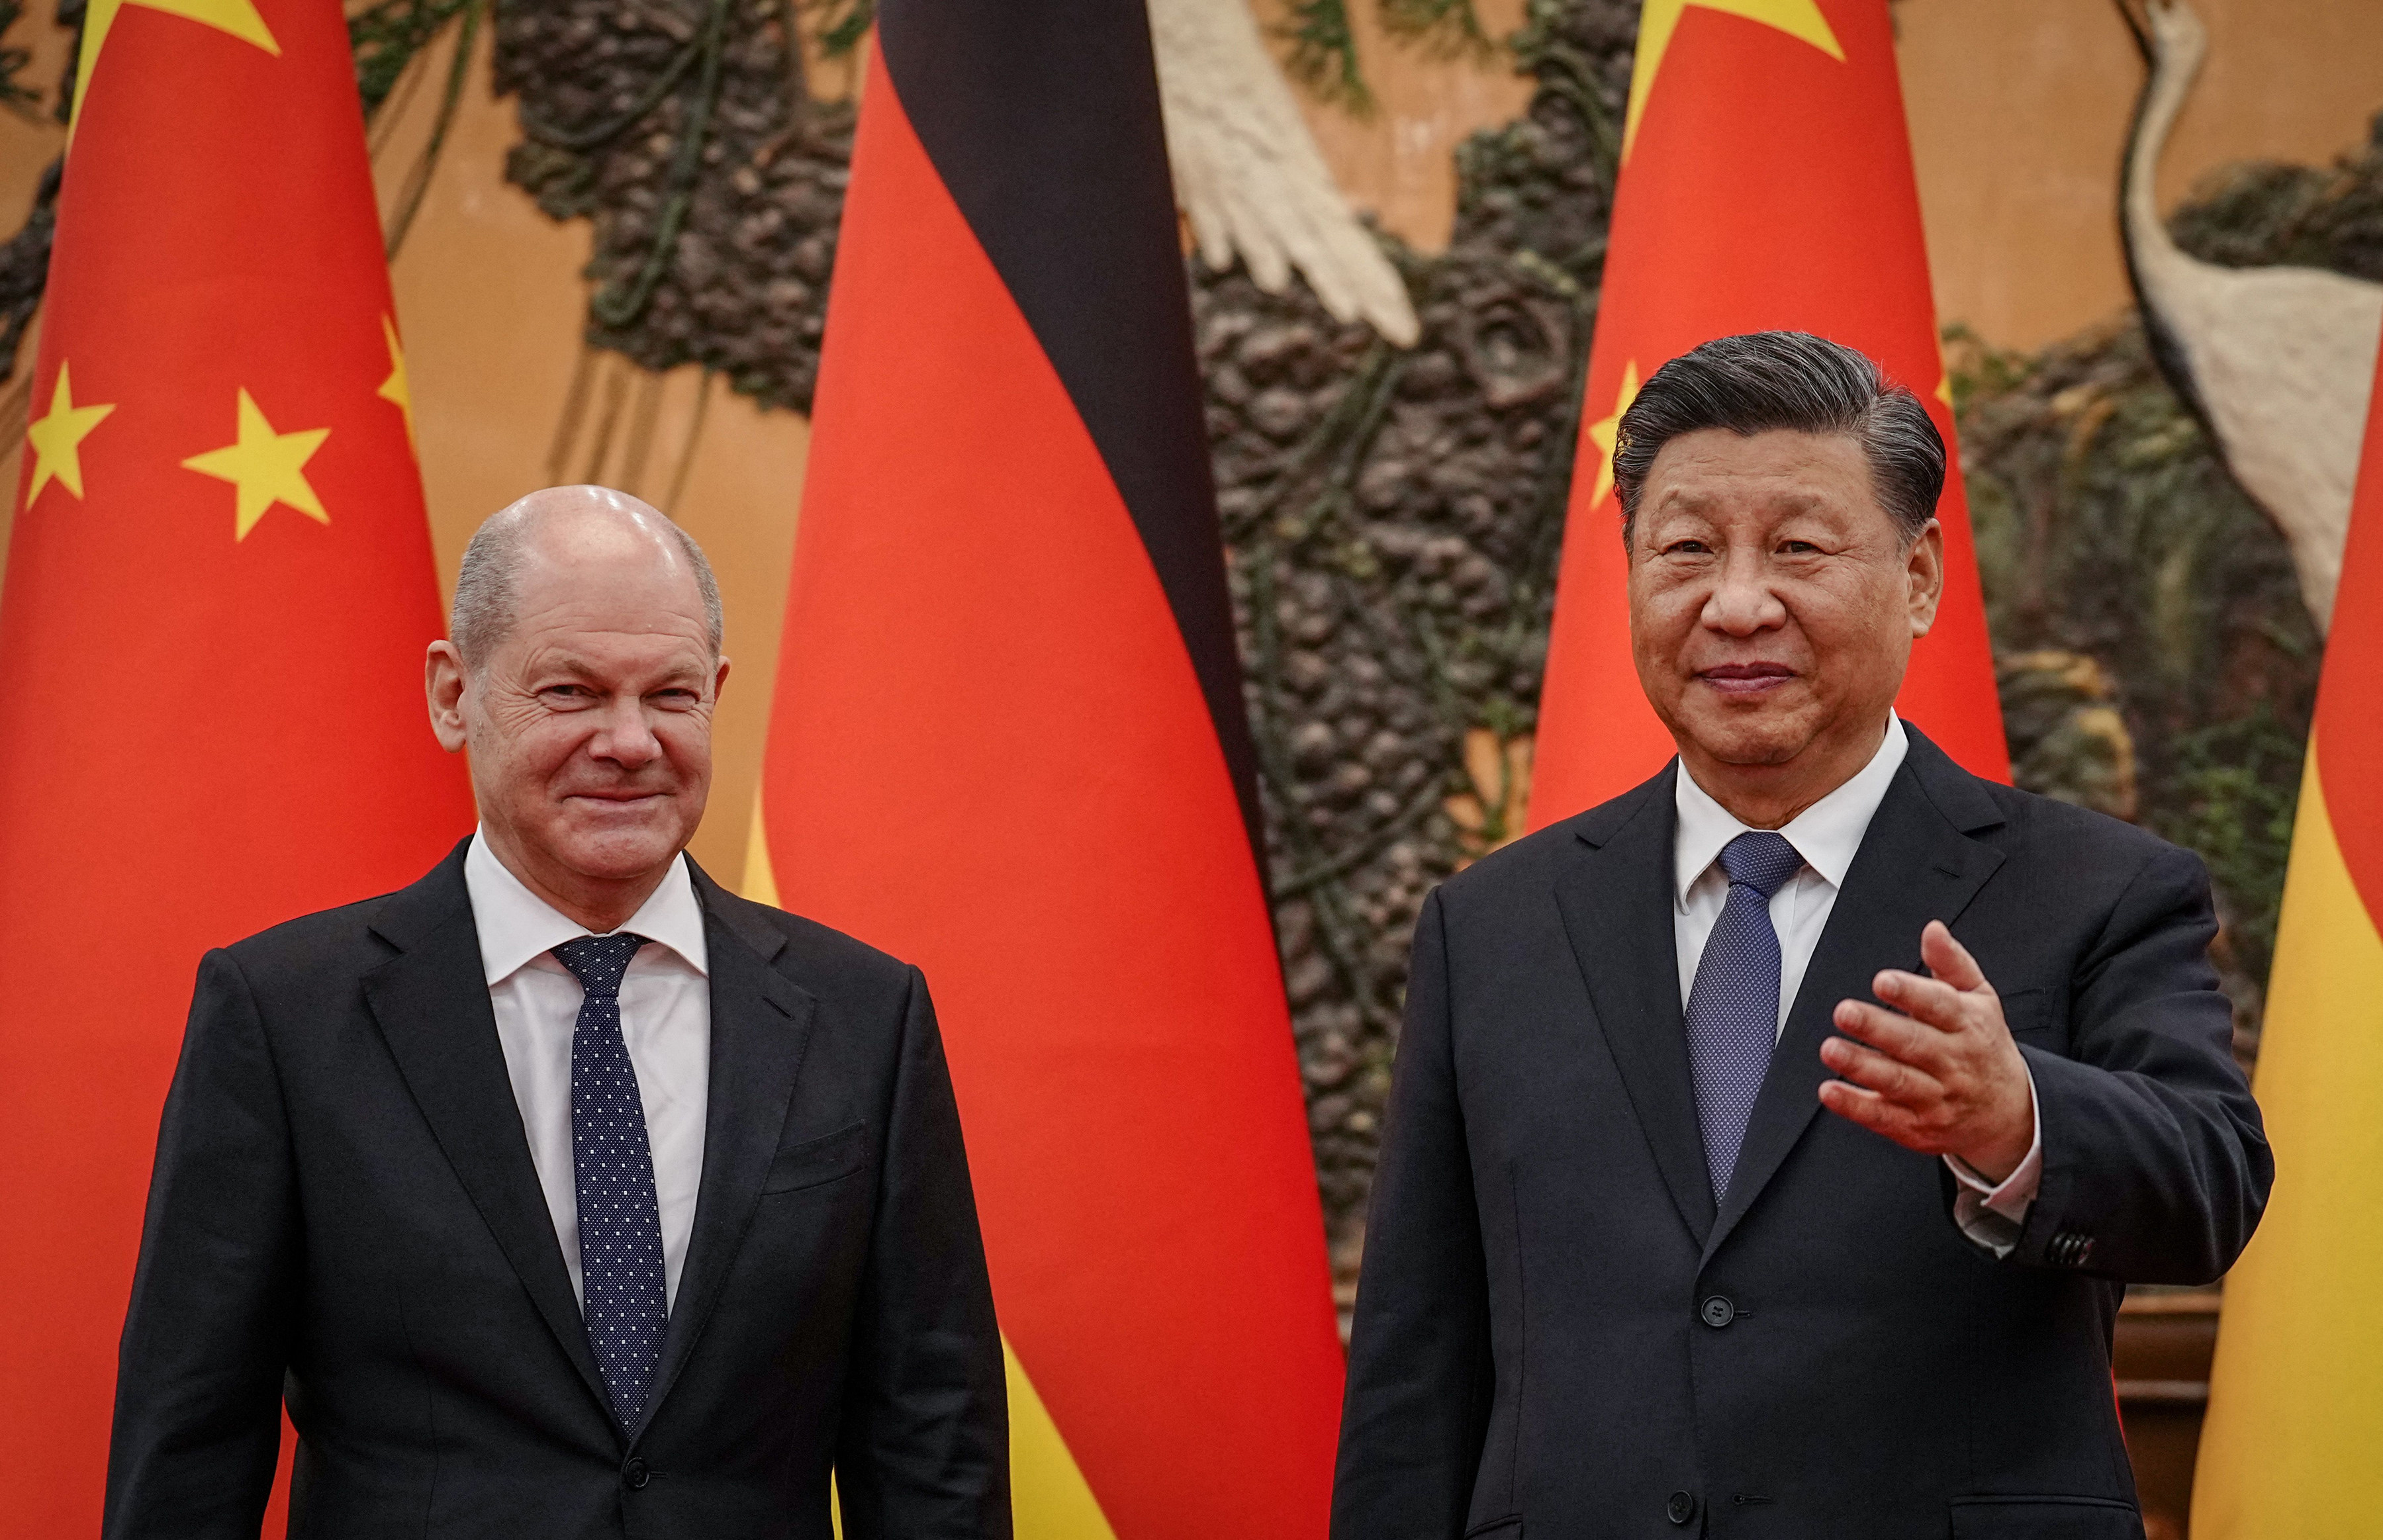 German Chancellor Olaf Scholz with Chinese President Xi Jinping in Beijing on November 4. Photo: AFP via Getty Images/TNS